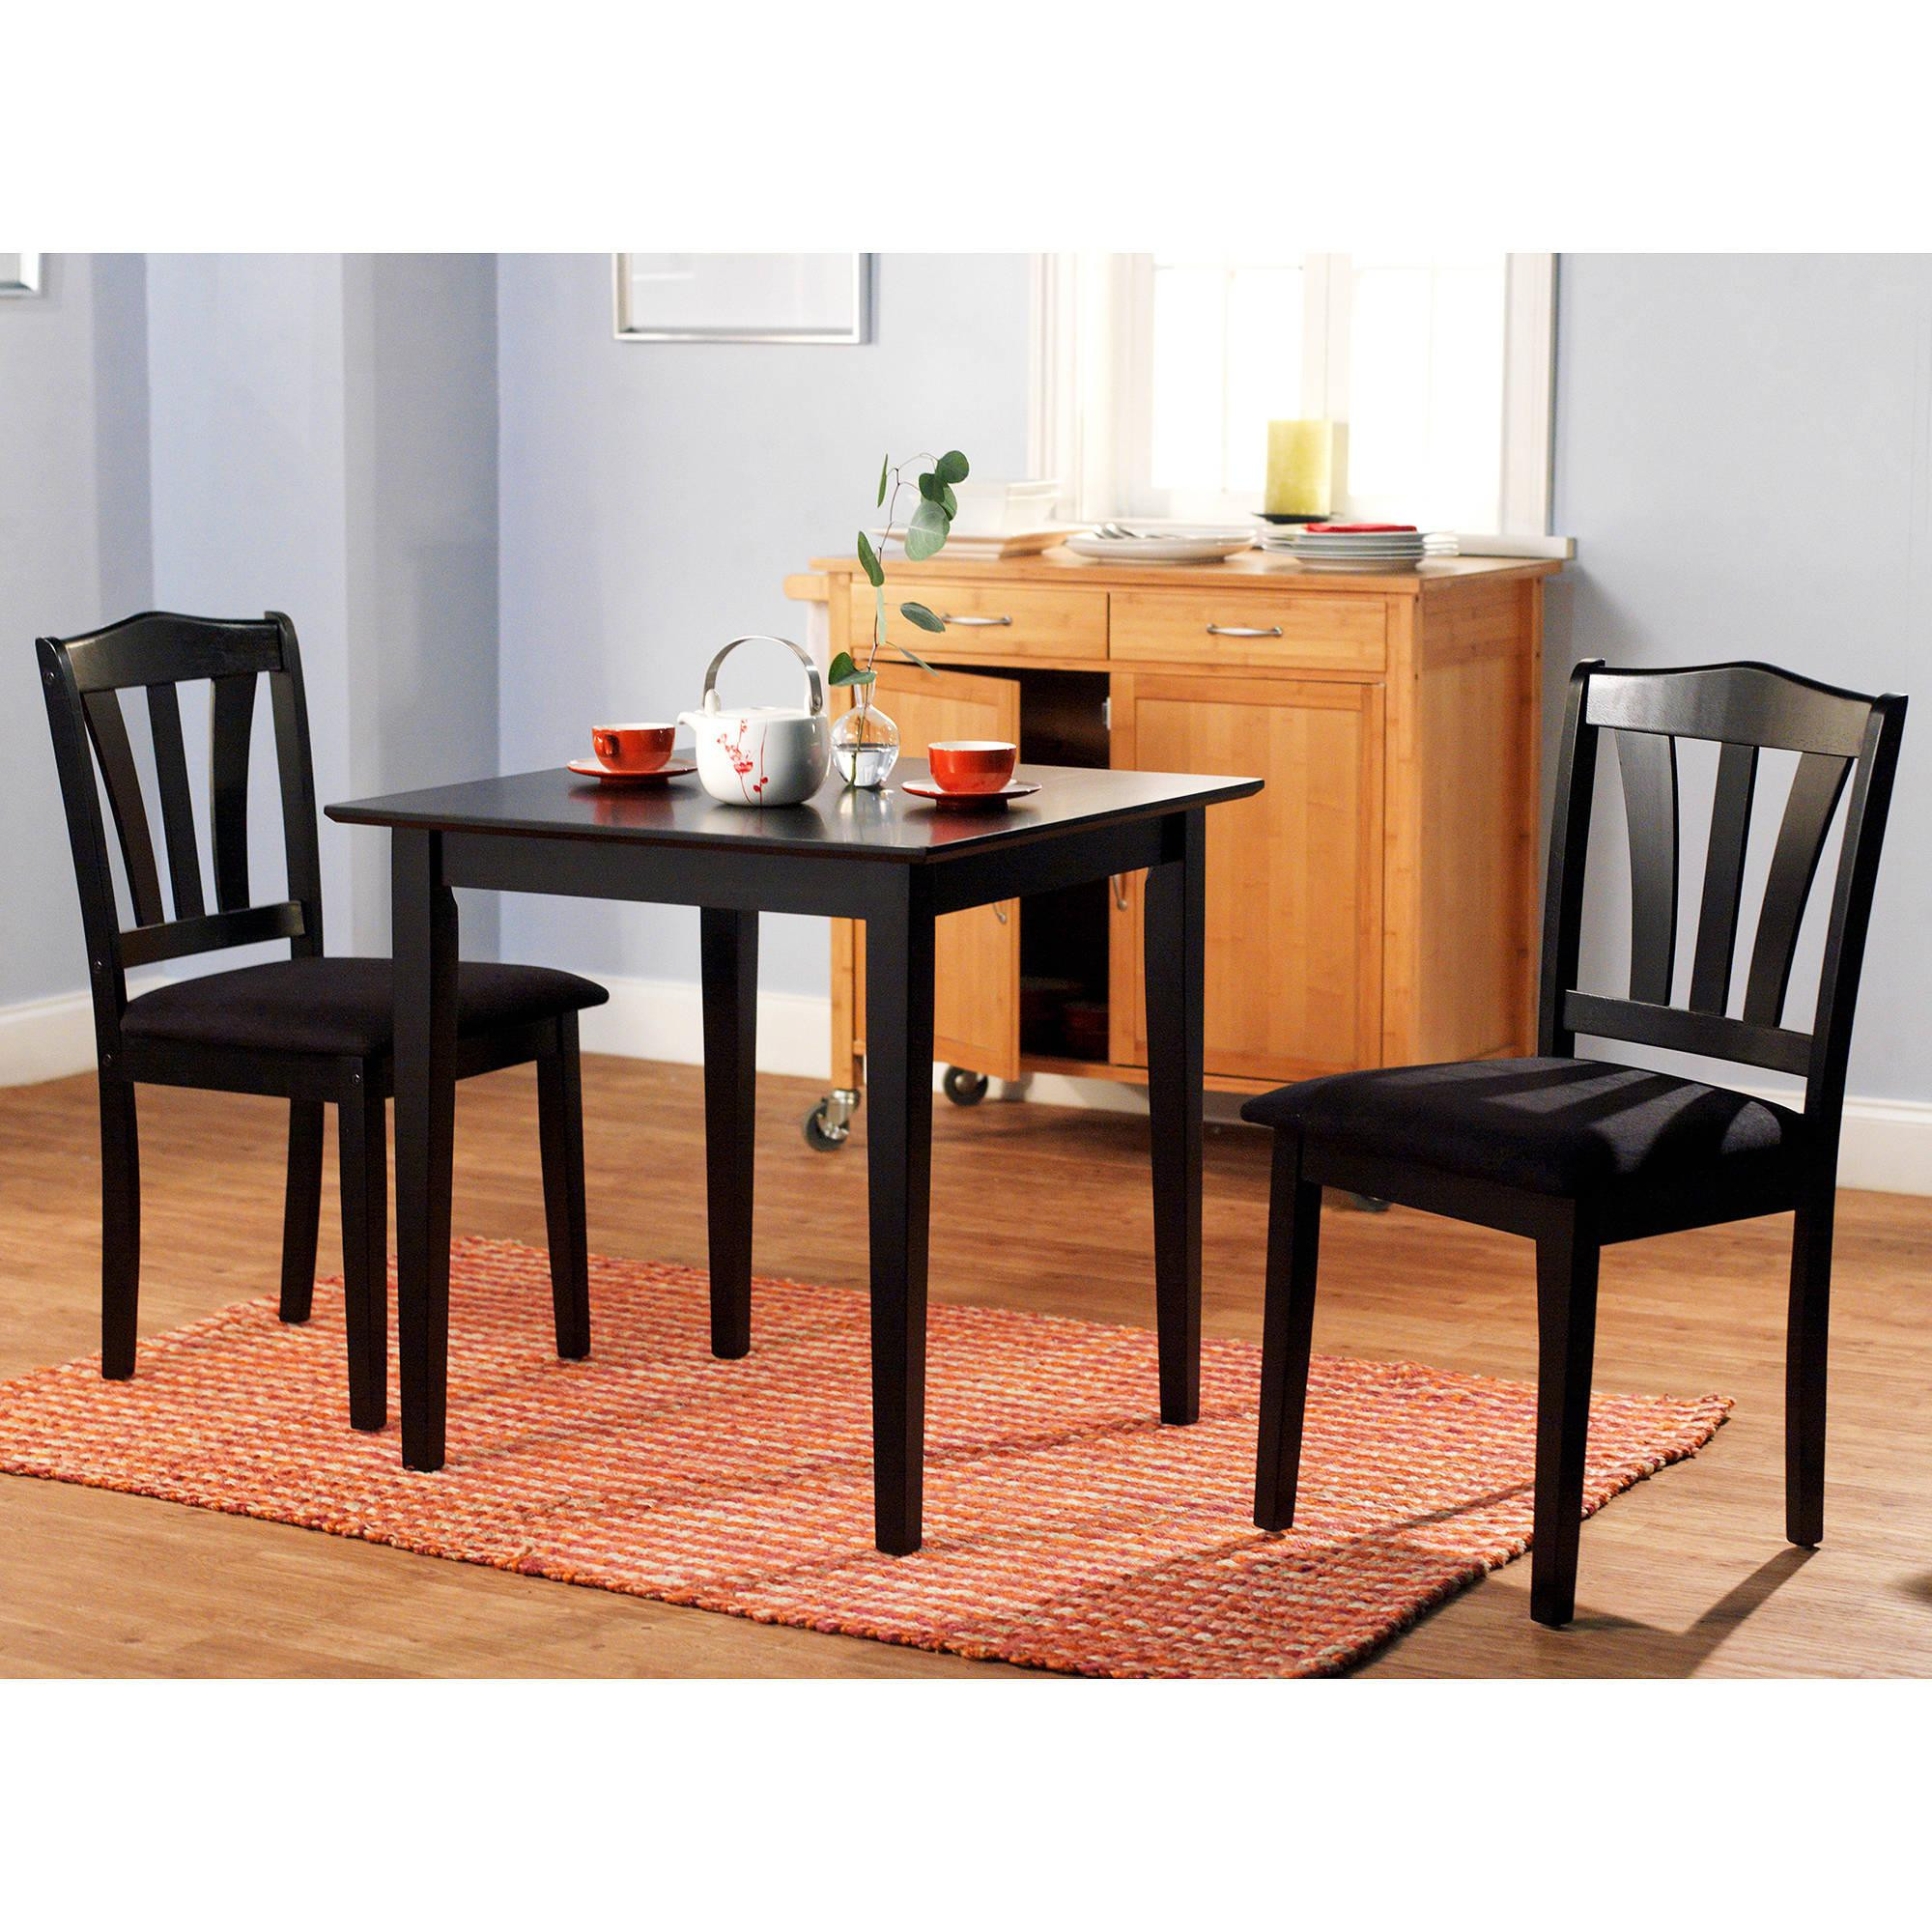 Small Kitchen Table Sets
 3 Piece Dining Set Table 2 Chairs Kitchen Room Wood